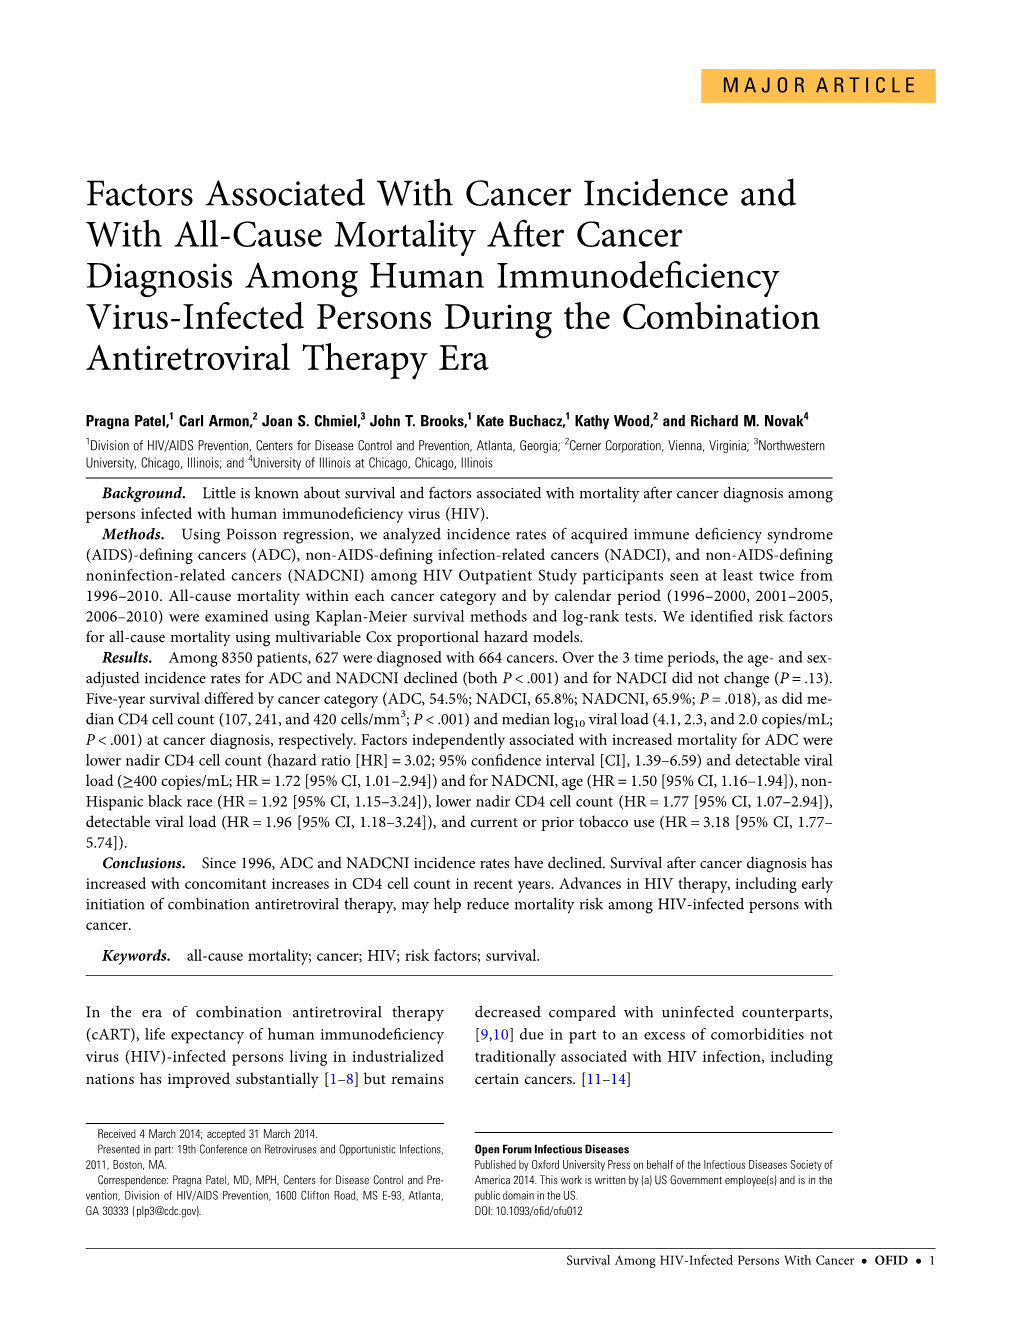 Factors Associated with Cancer Incidence